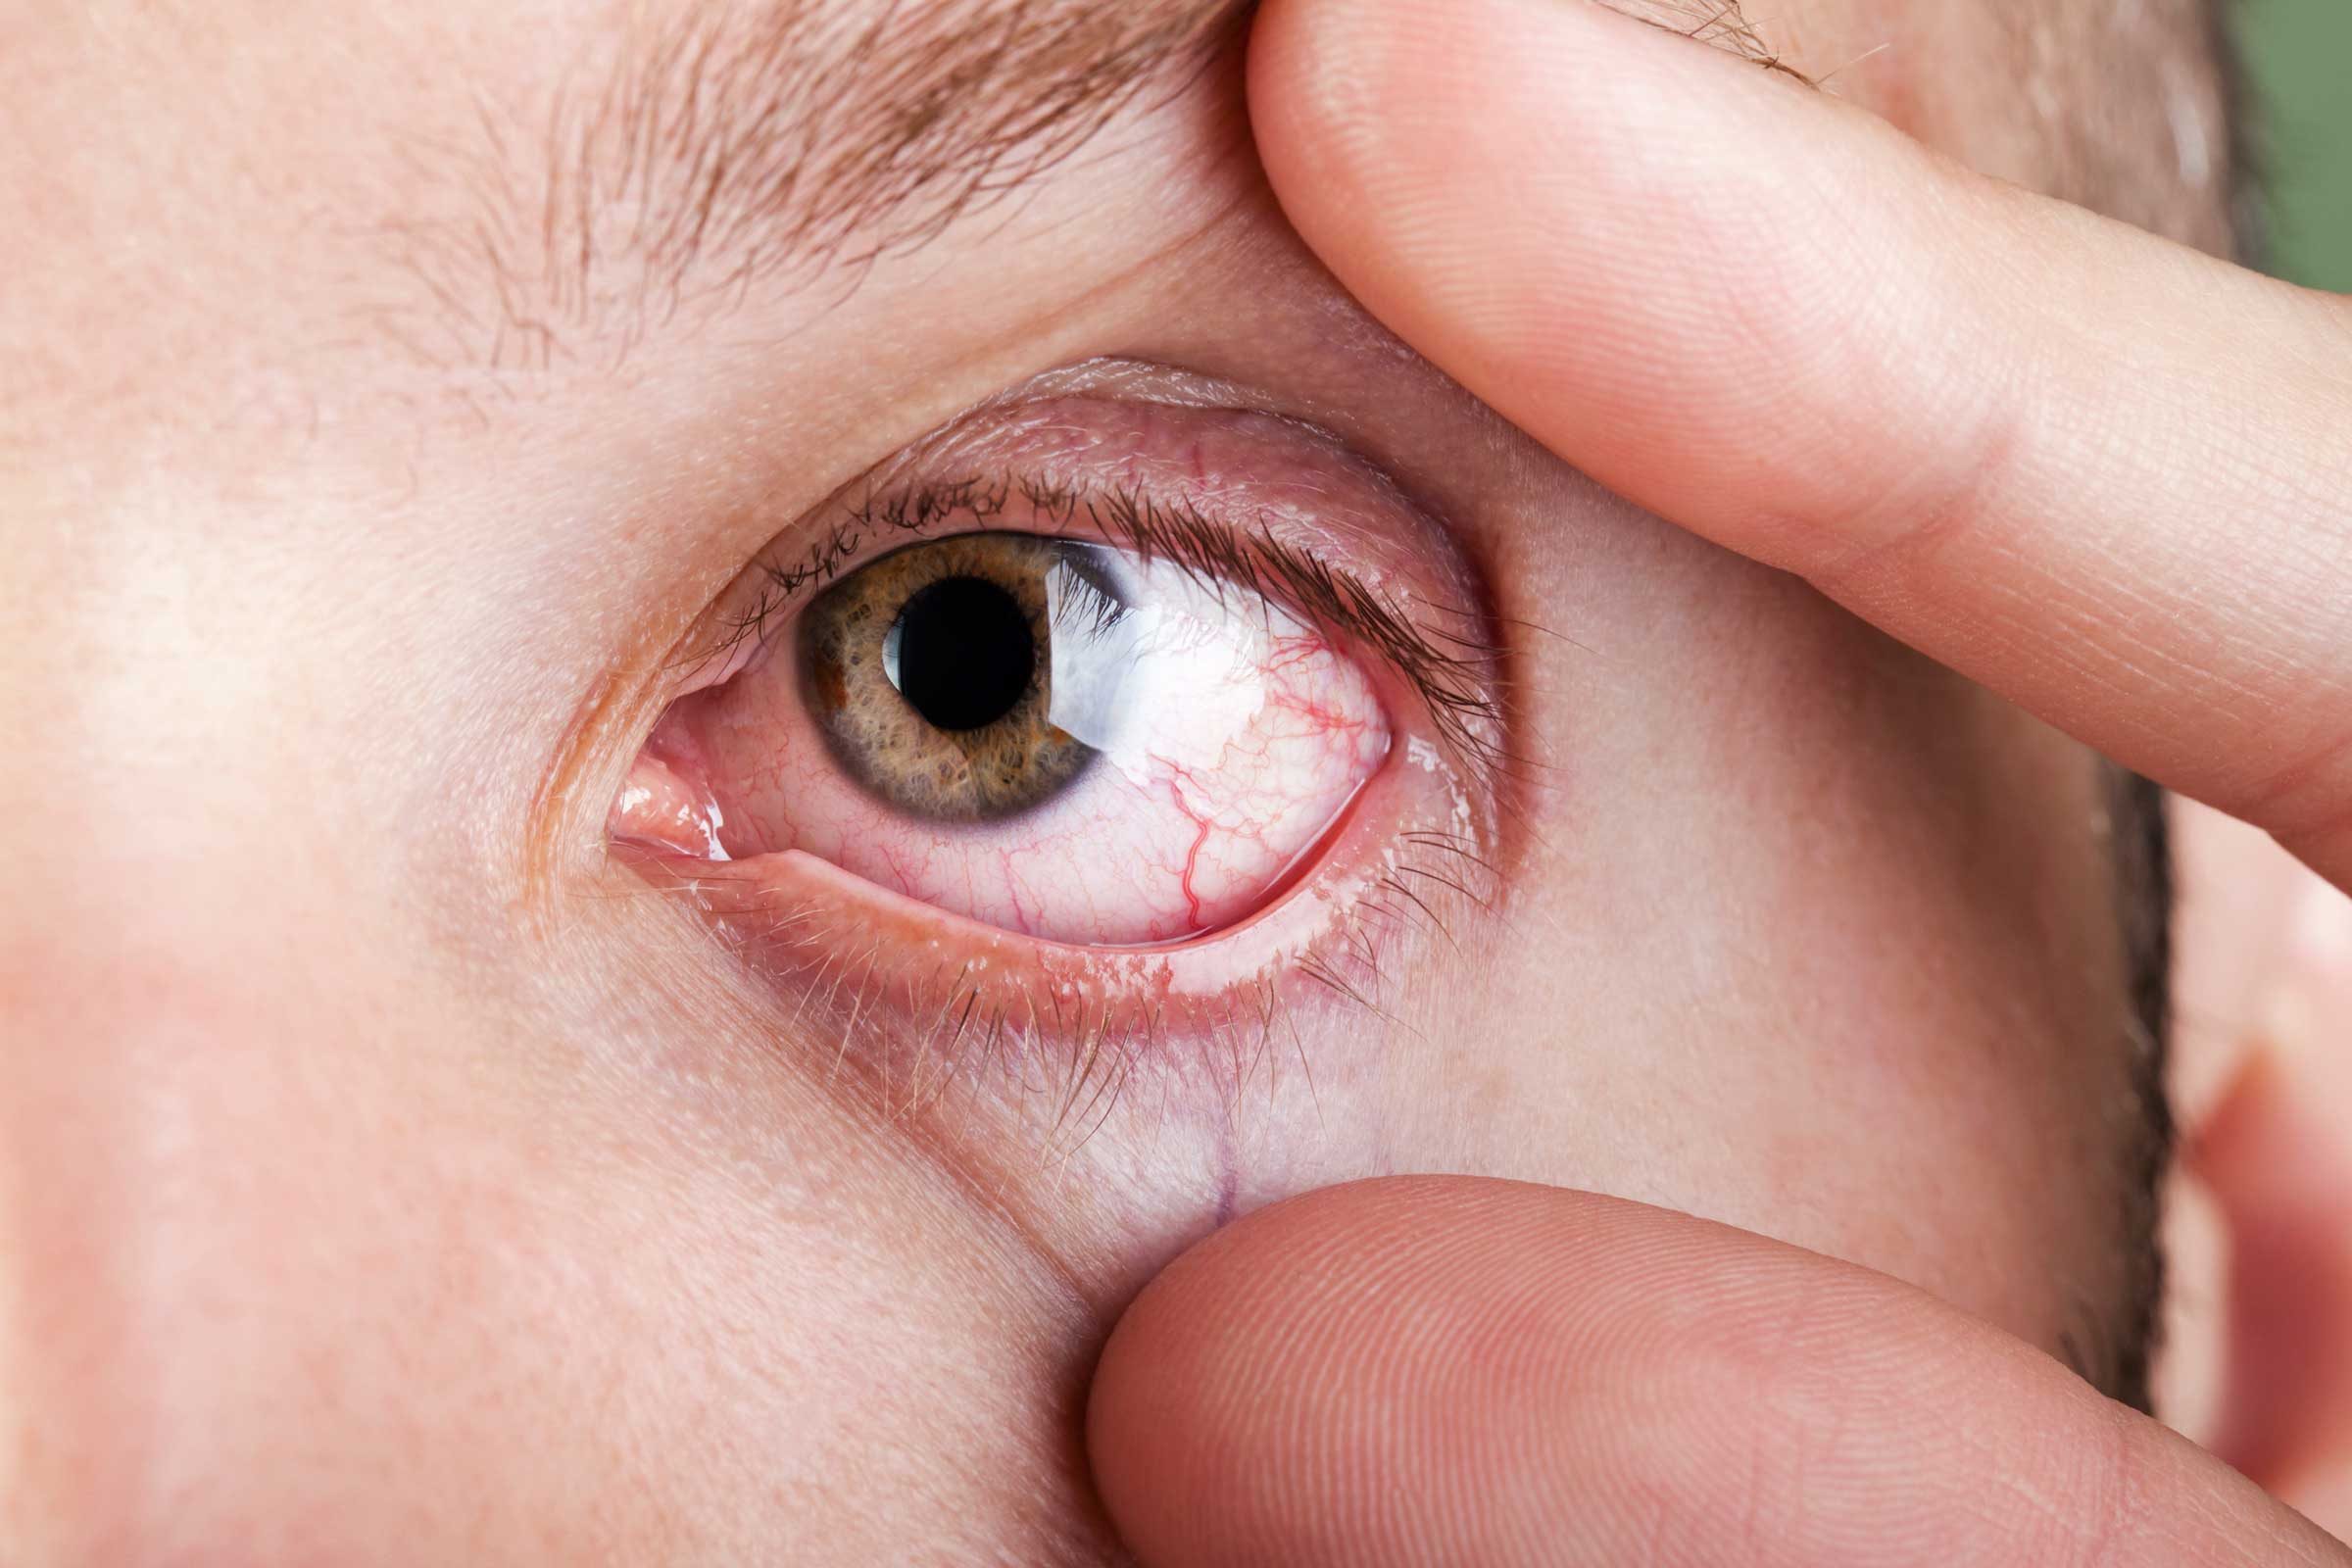 How do you know if you have pink eye?